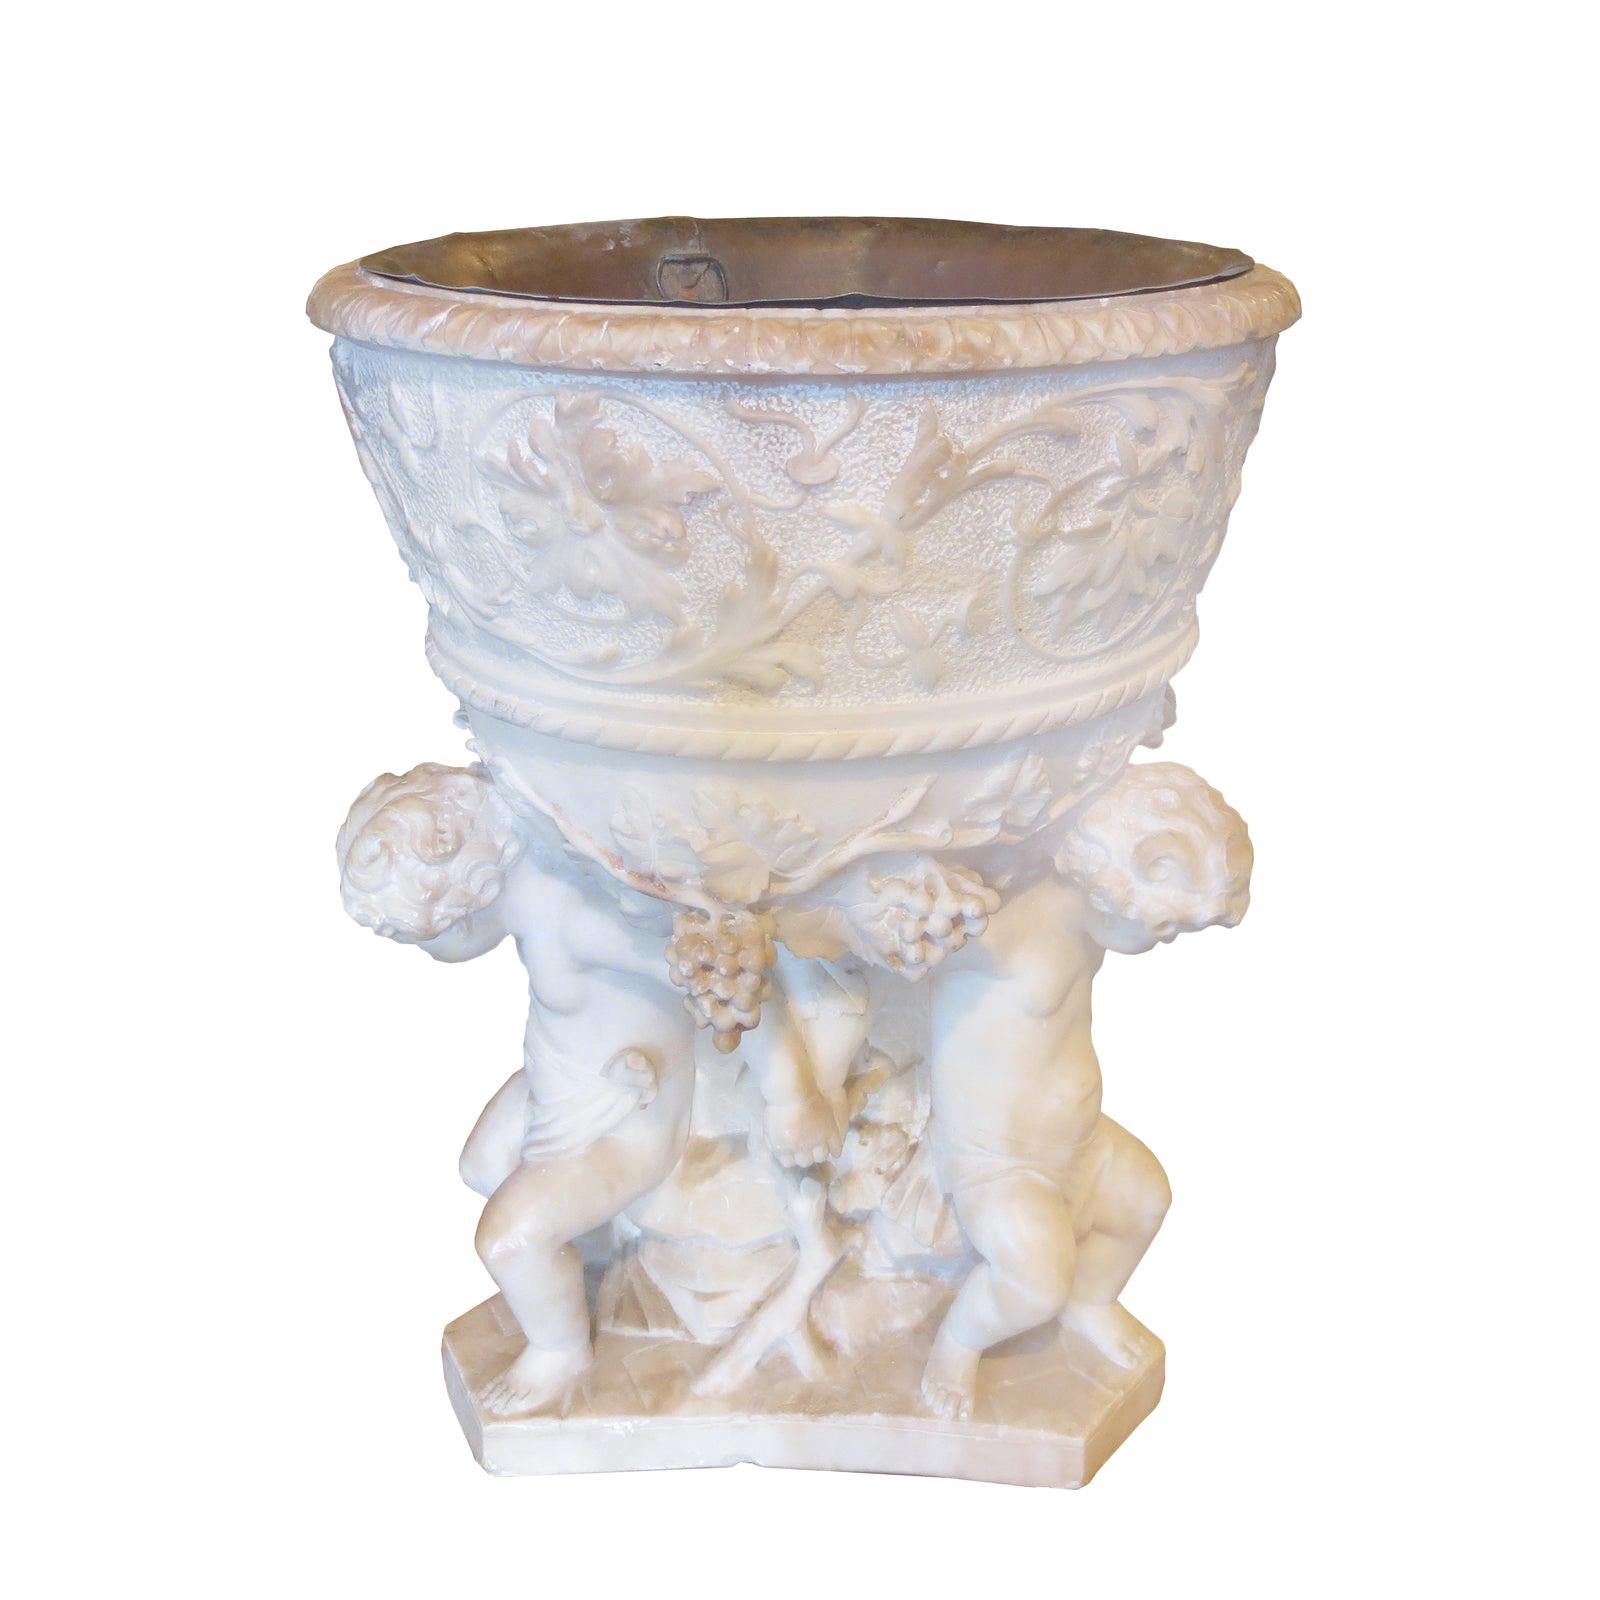 Italian Firenze Carved Marble Urn by Ferdinando Andreini, Signed circa 1843-1922 For Sale